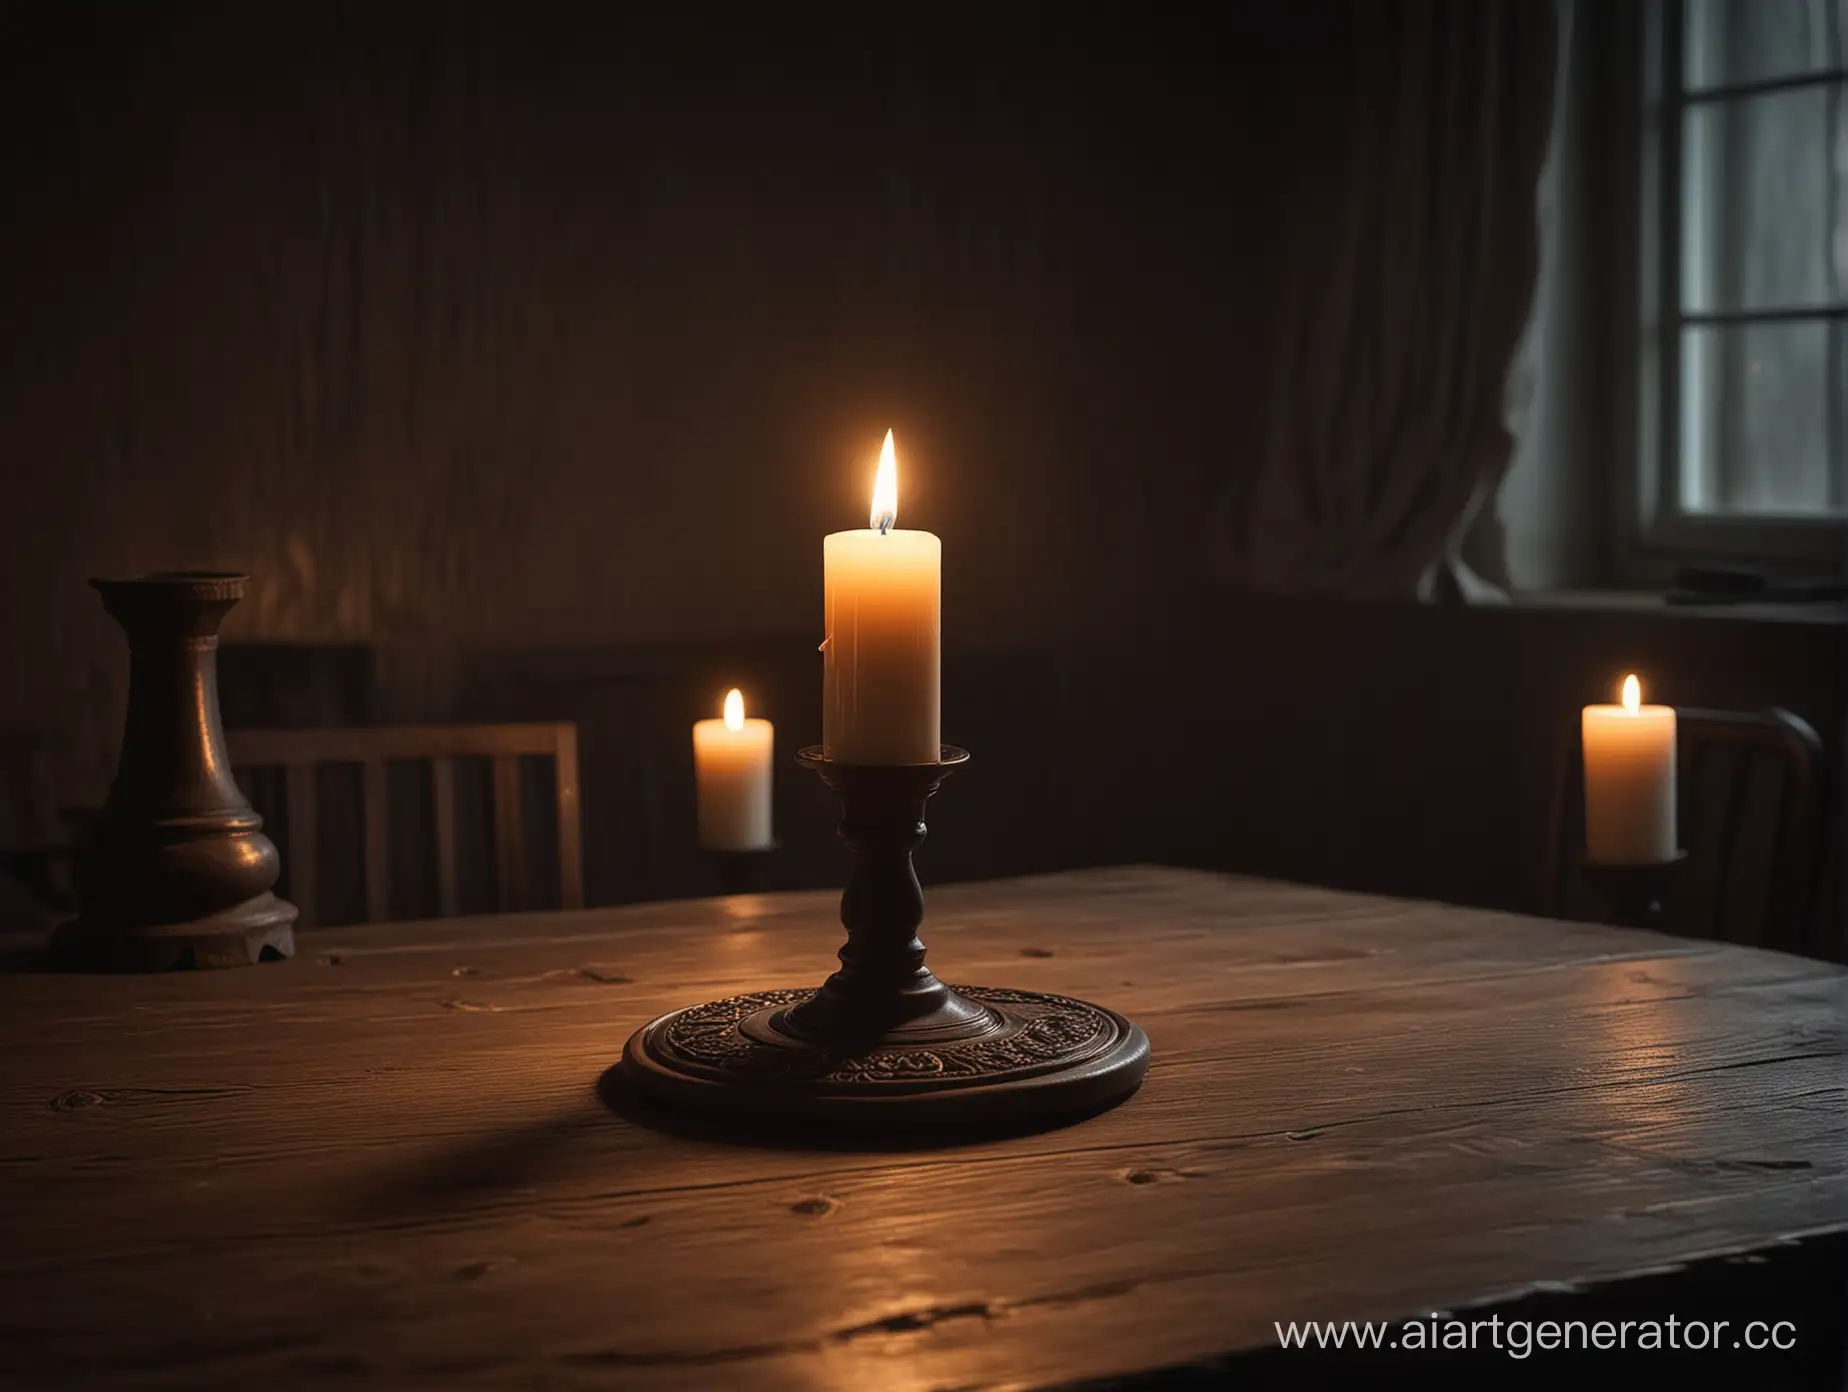 Cozy-Mystery-Illuminated-Wooden-Table-in-Warm-Candlelight